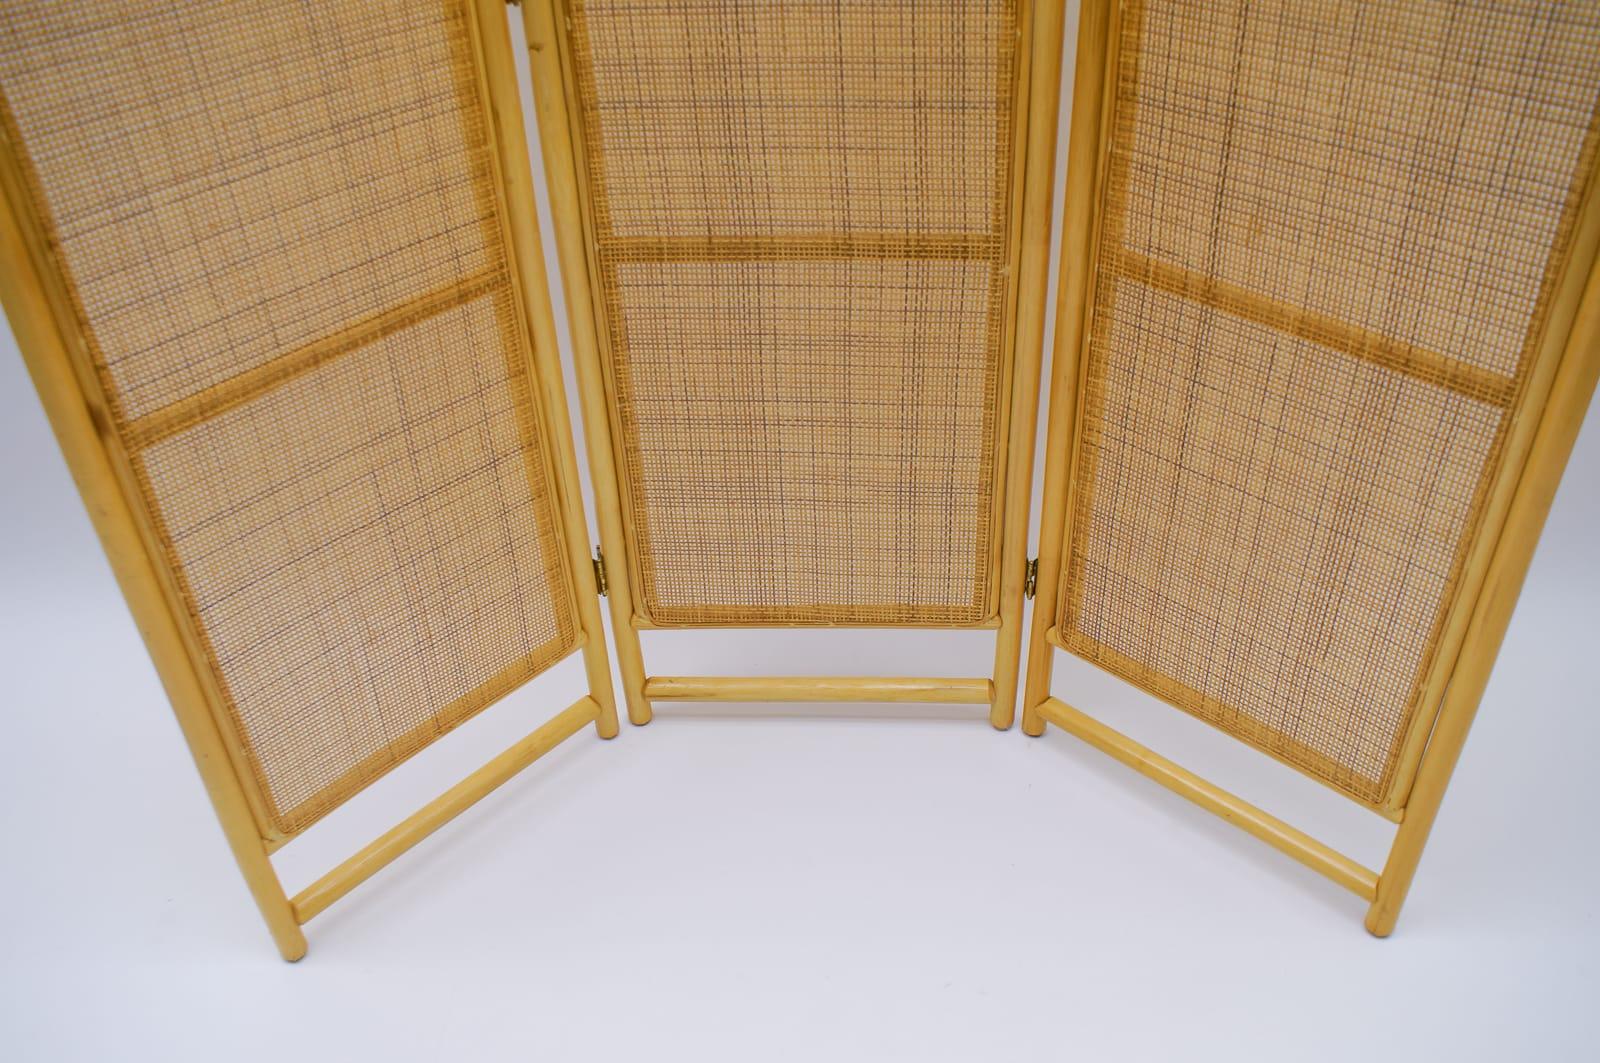 Italian Sculptural Three-Panel Folding Screen Room Divider in Rattan and Wicker, 1960s For Sale